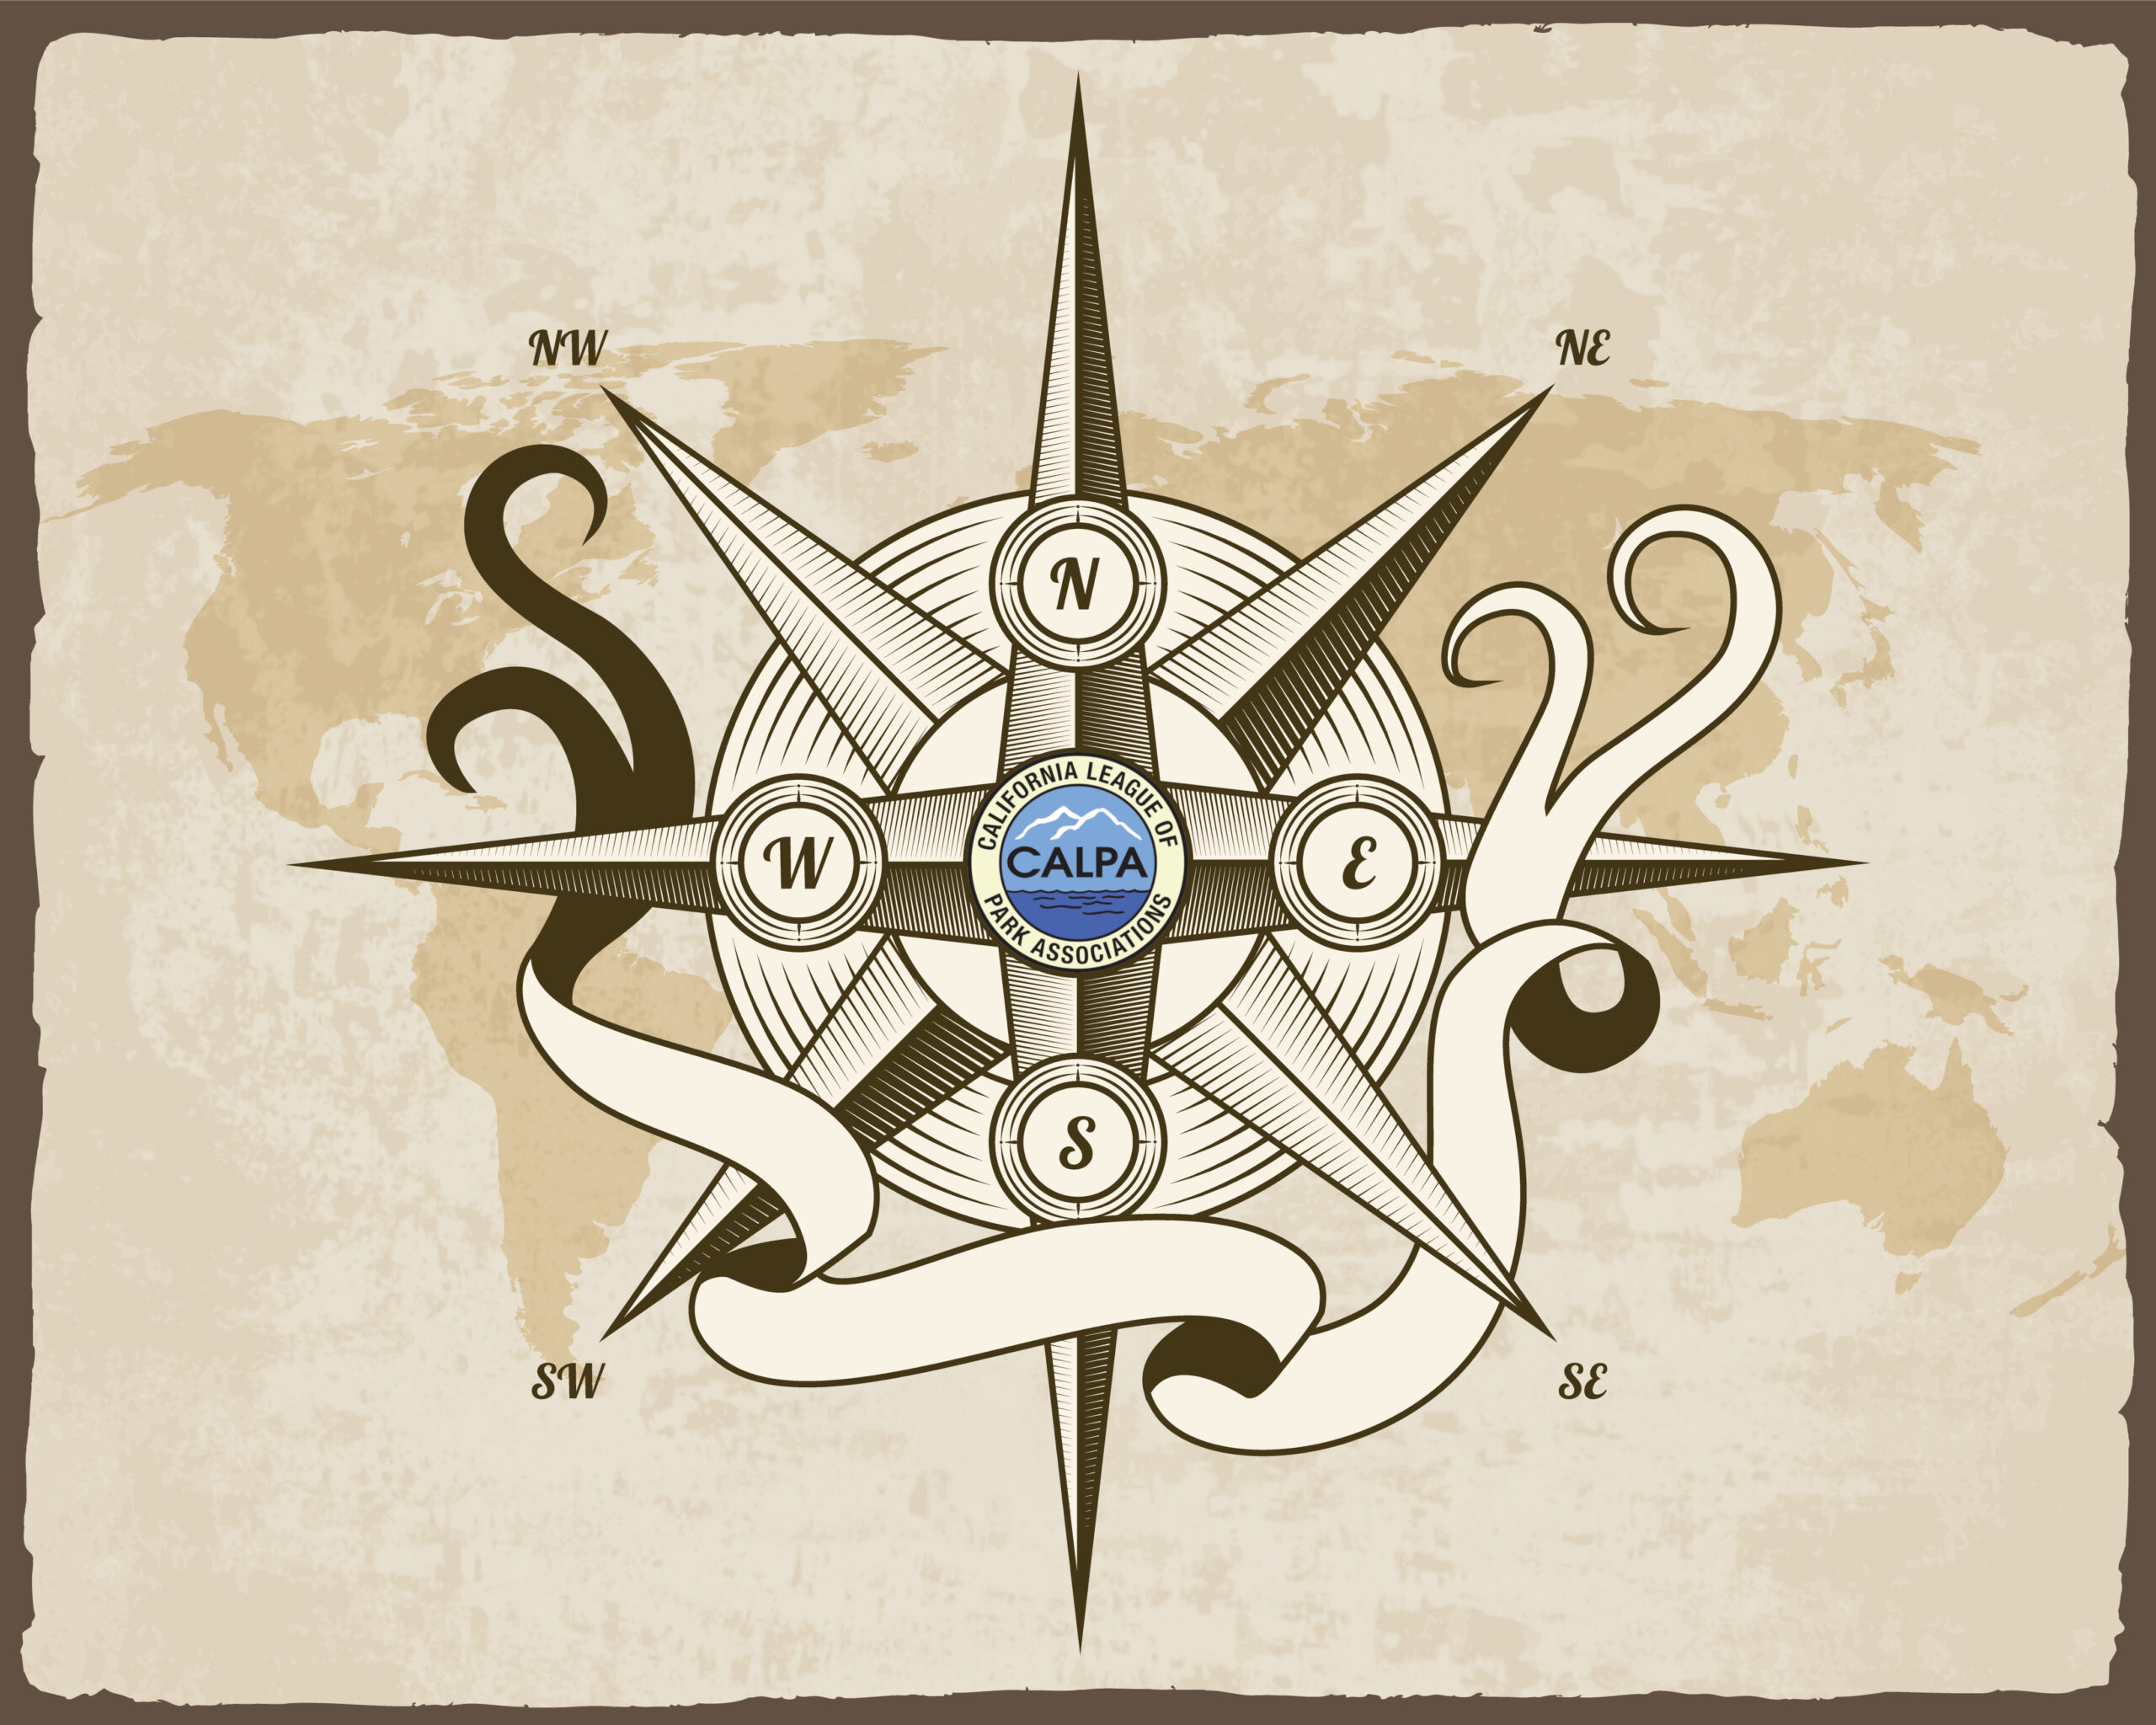 Vintage nautical compass. Old world map on vector paper texture with grunge border frame. Wind rose. With CALPA logo.